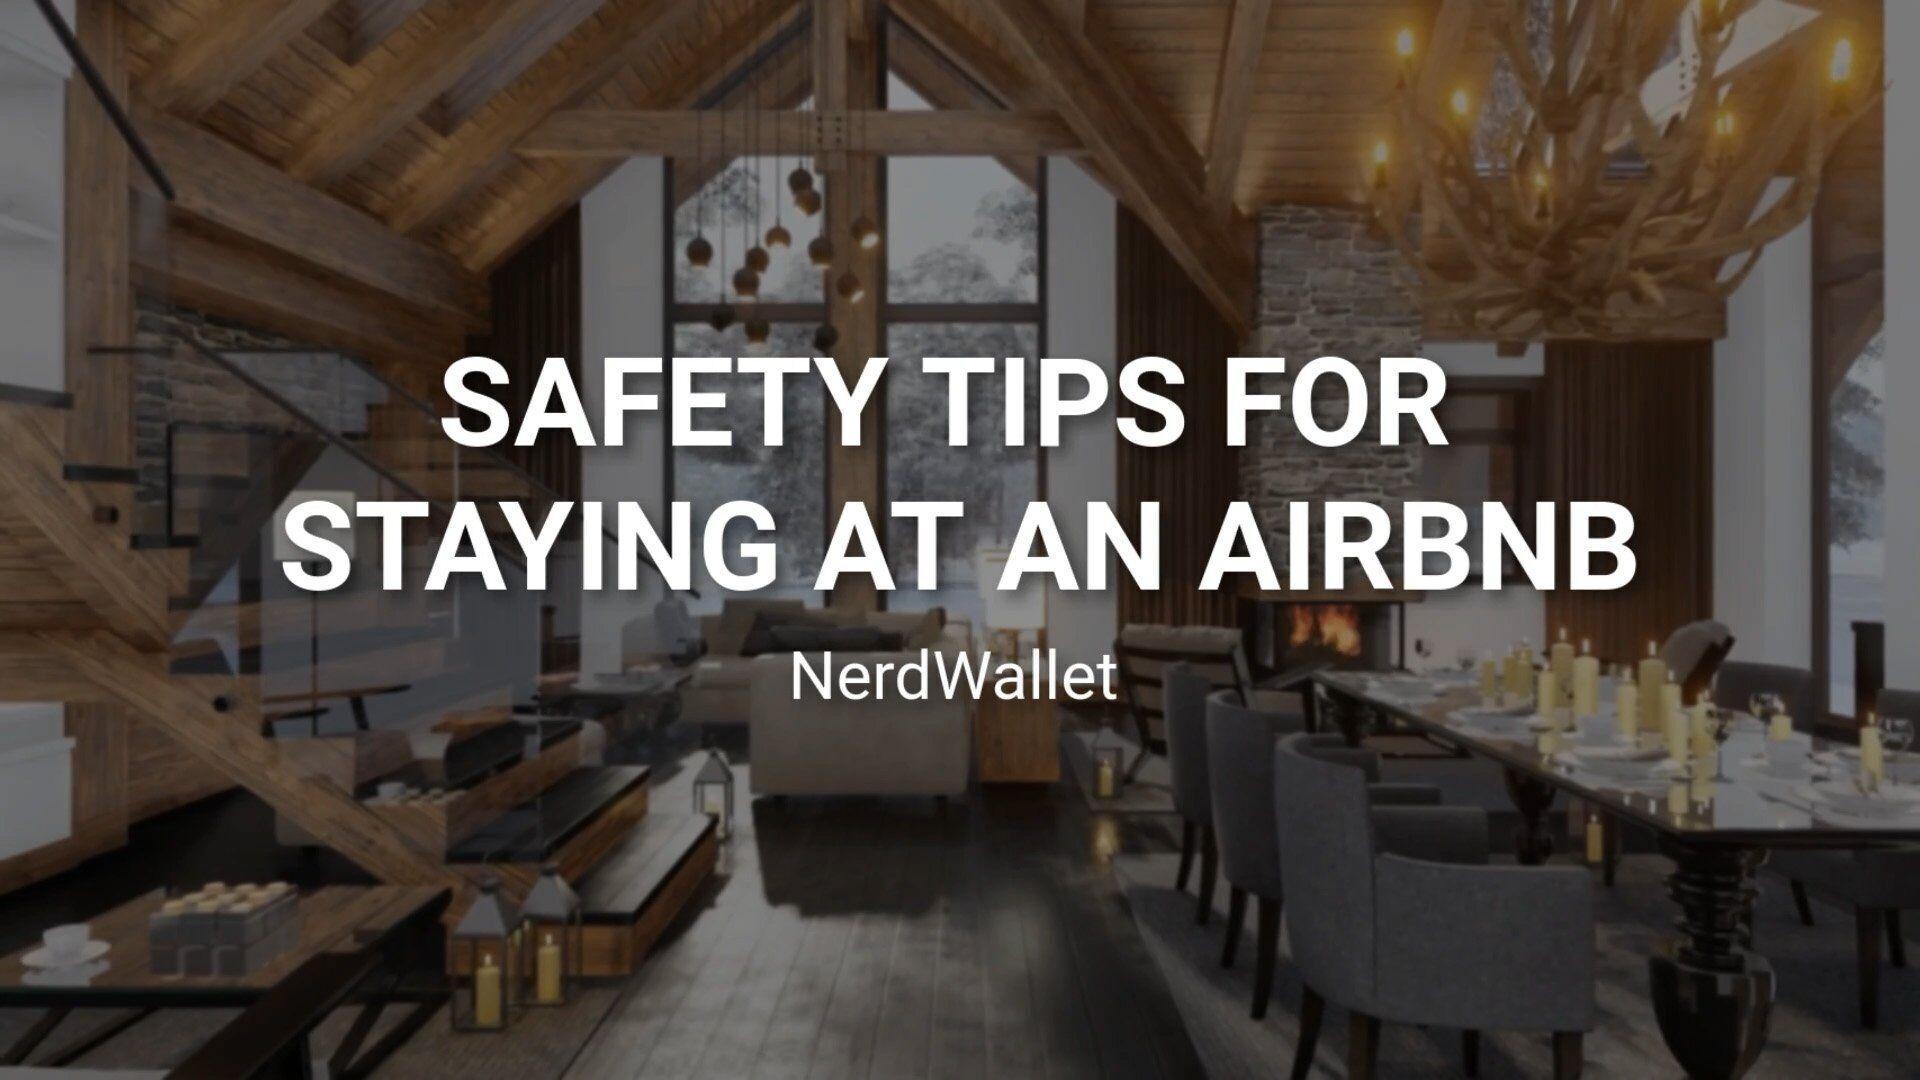 Are Airbnbs More Cost Effective Than Hotels? - NerdWallet